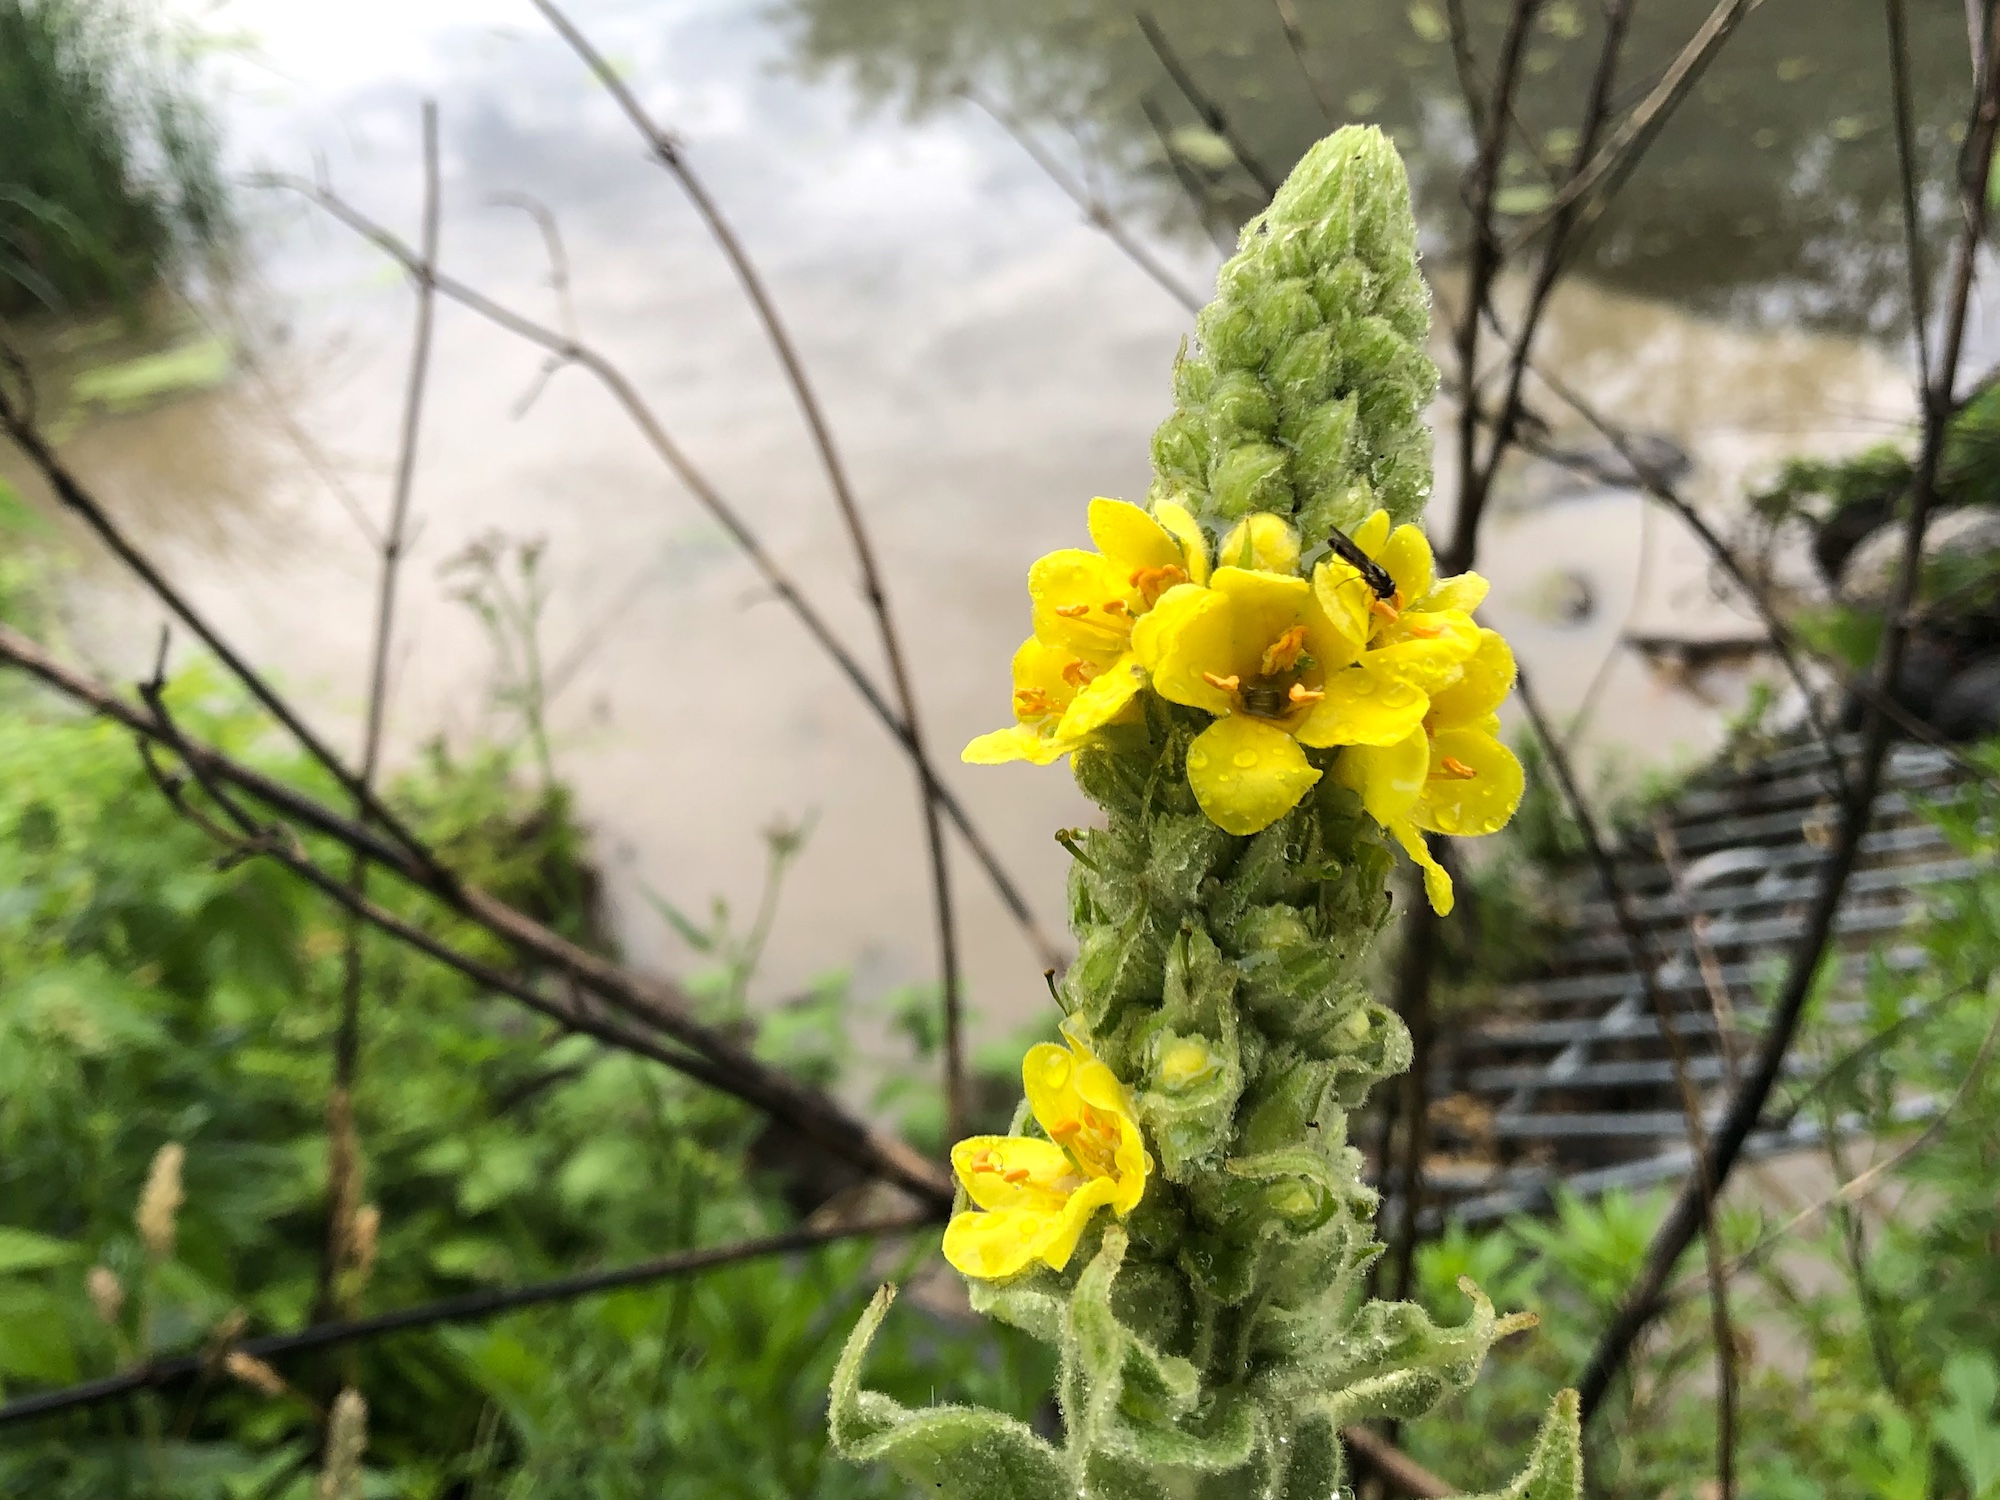 Common Mullein on shore of Marion Dunn Pond on June 26, 2020.